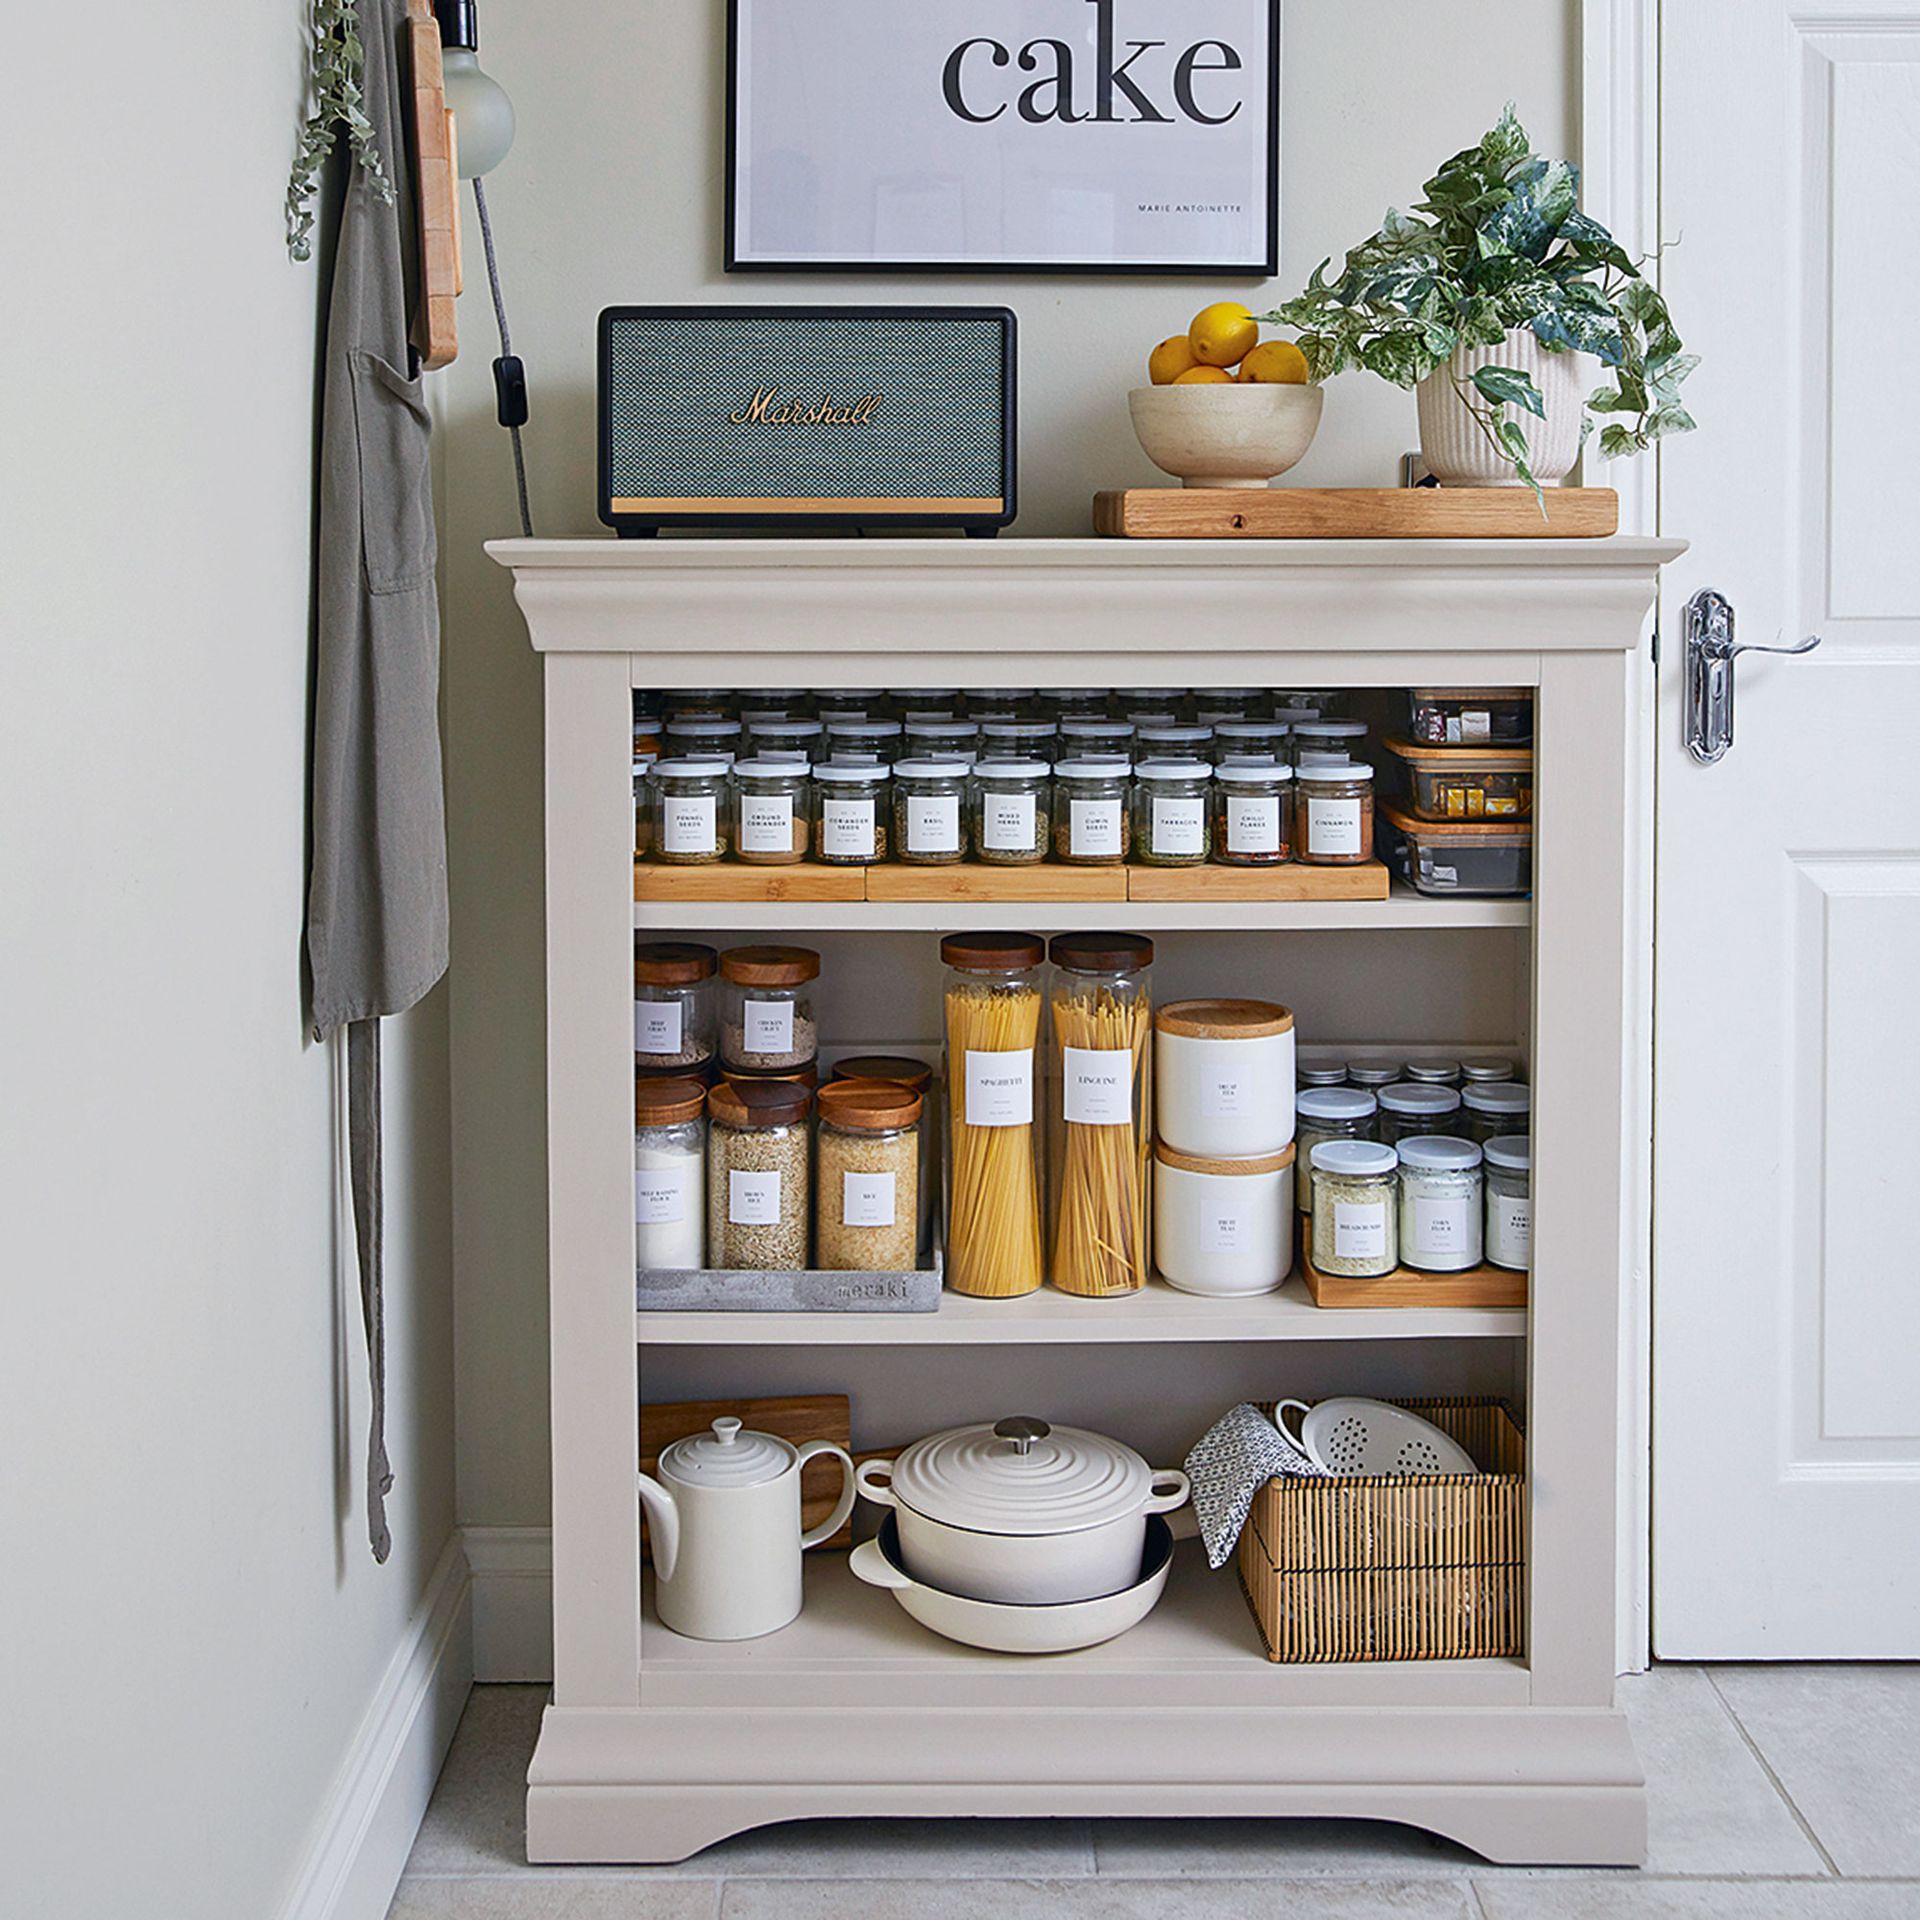  pantry ideas for small kitchens